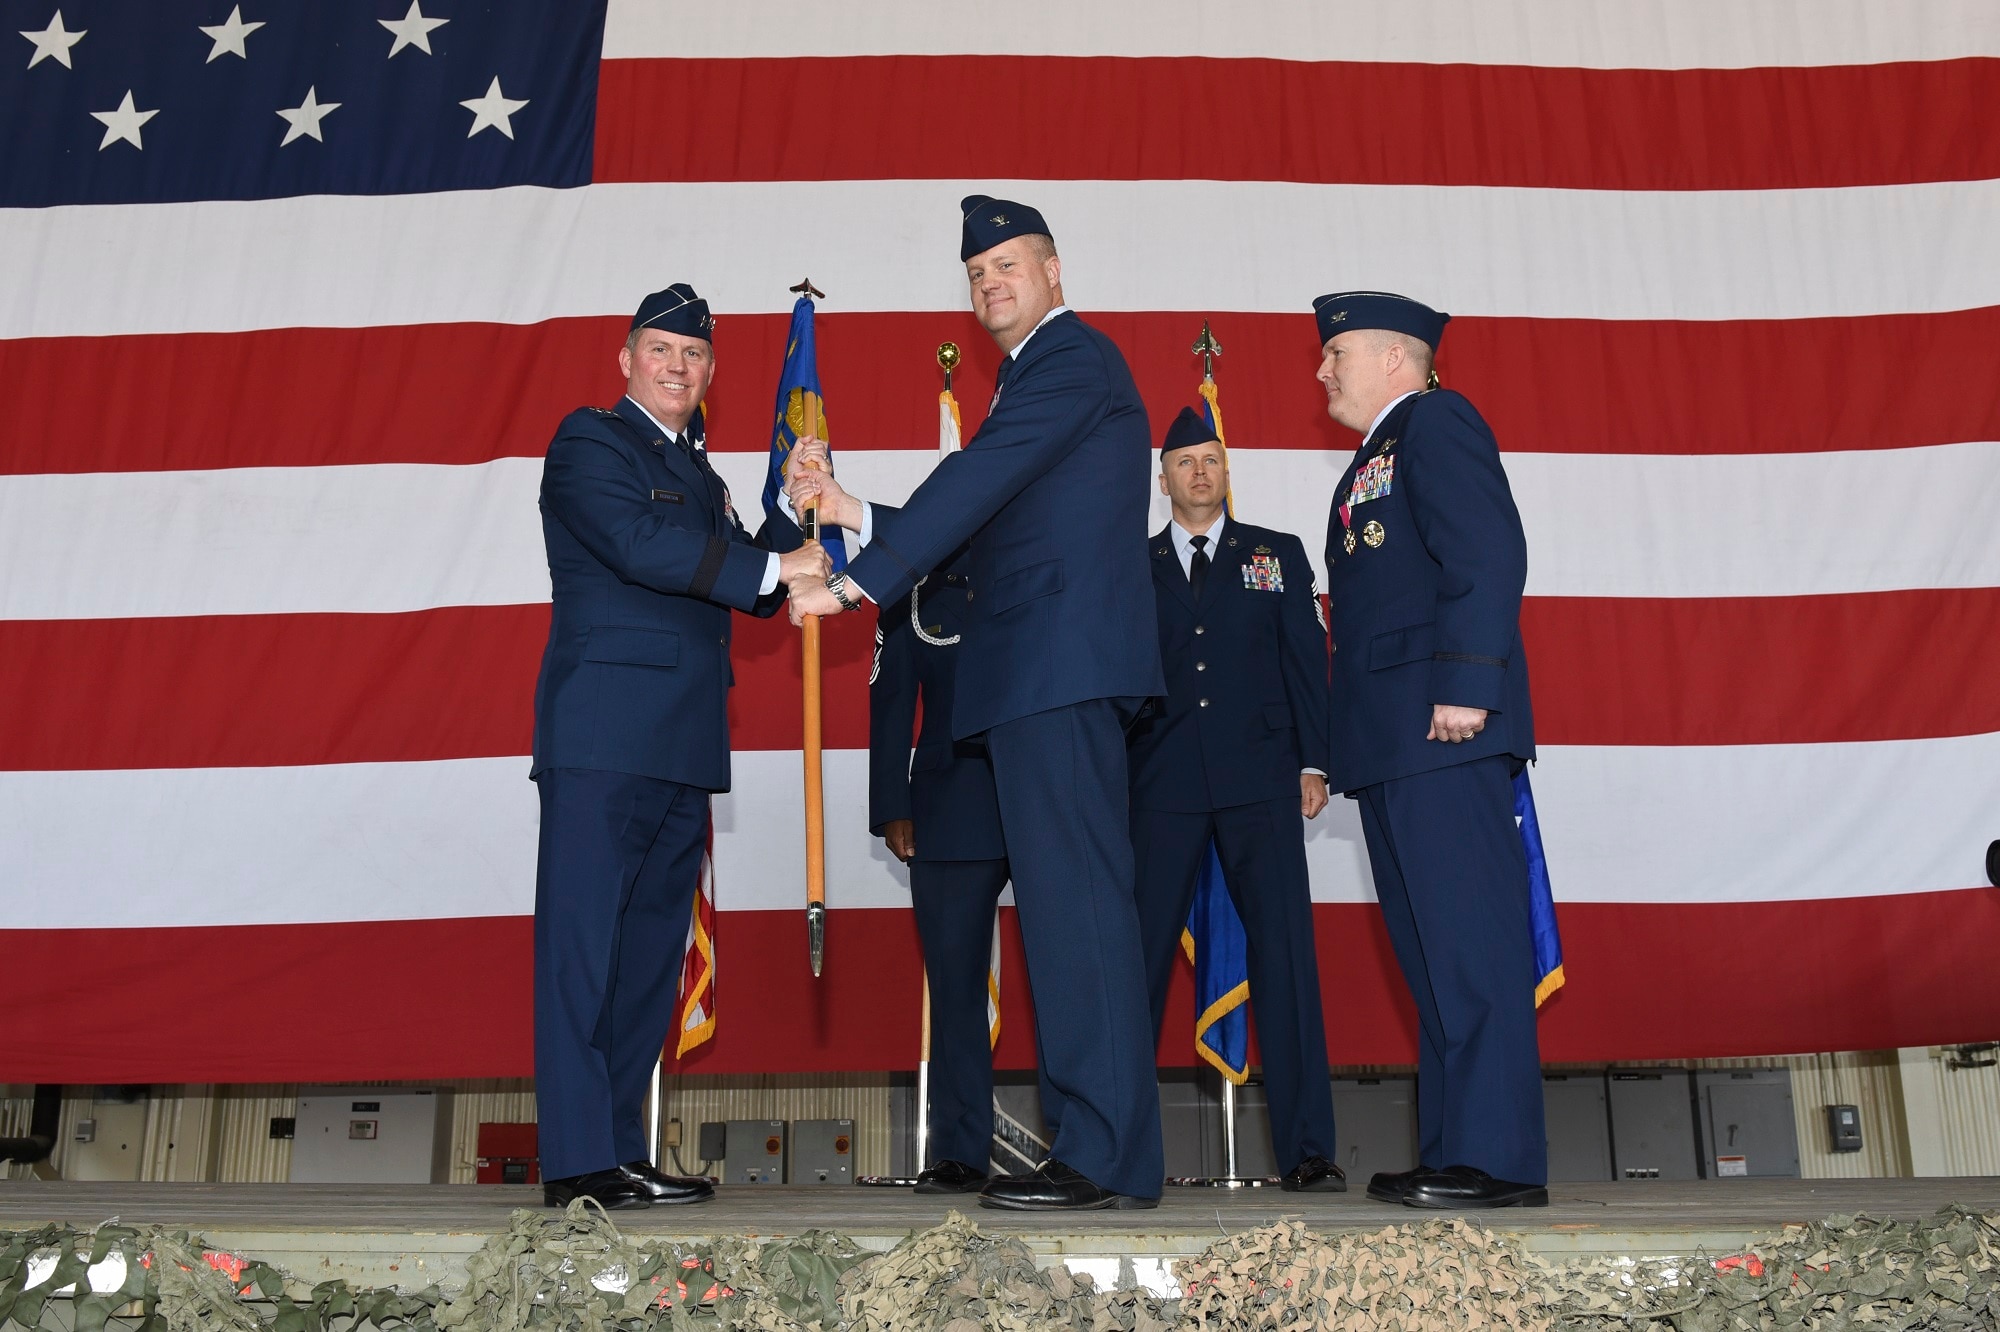 Lt. Gen. Thomas Bergeson, 7th Air Force commander, presents the 8th Fighter Wing guidon to Col. David Shoemaker, 8th Fighter Wing commander, during a change of command ceremony at Kunsan Air Base, Republic of Korea, May 25, 2017. During the ceremony, Shoemaker assumed command of the 8th Fighter Wing, filling the position of his predecessor, Col. Todd Dozier. (U.S. Air Force photo by Senior Airman Michael Hunsaker/Released)